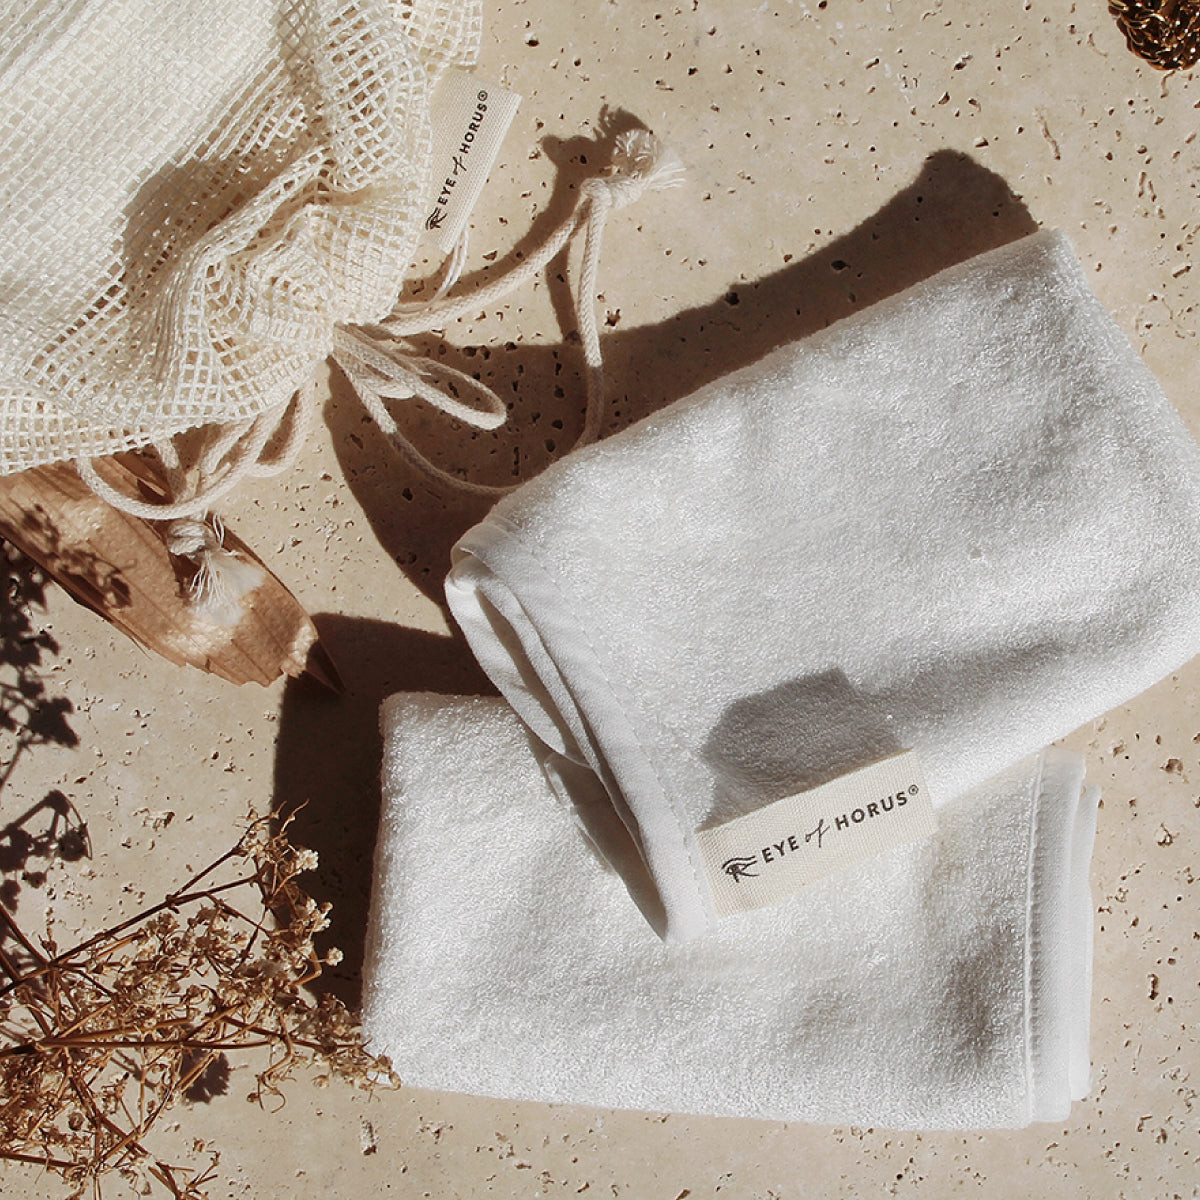 Bamboo Cleansing Cloth Kit